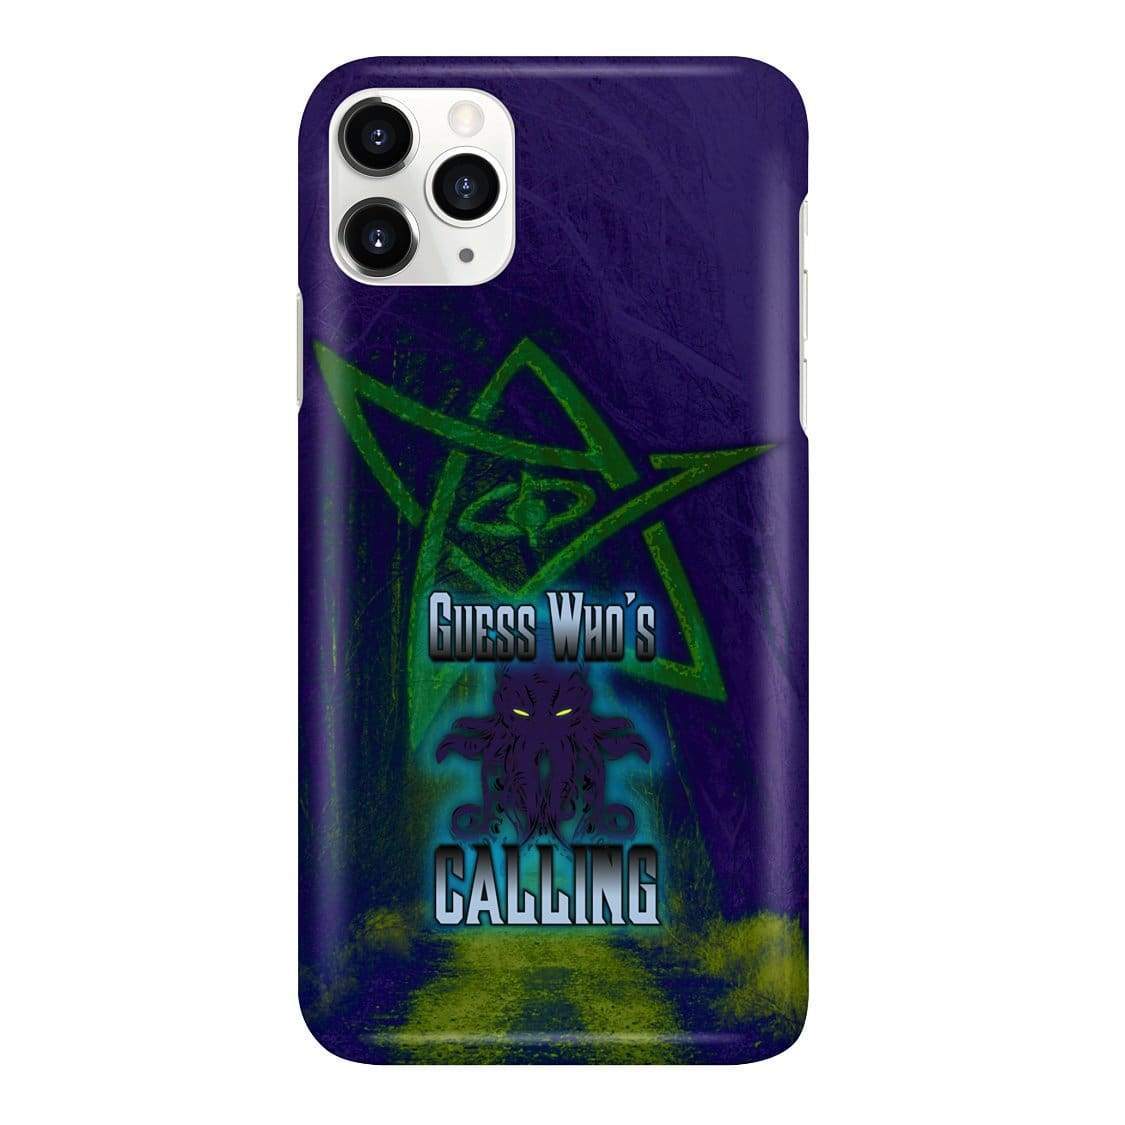 Cthulhu - Guess Who’s Calling Phone Case - Snap * iPhone * Samsung * - iPhone 11 Pro Max Case / Gloss / Apparel